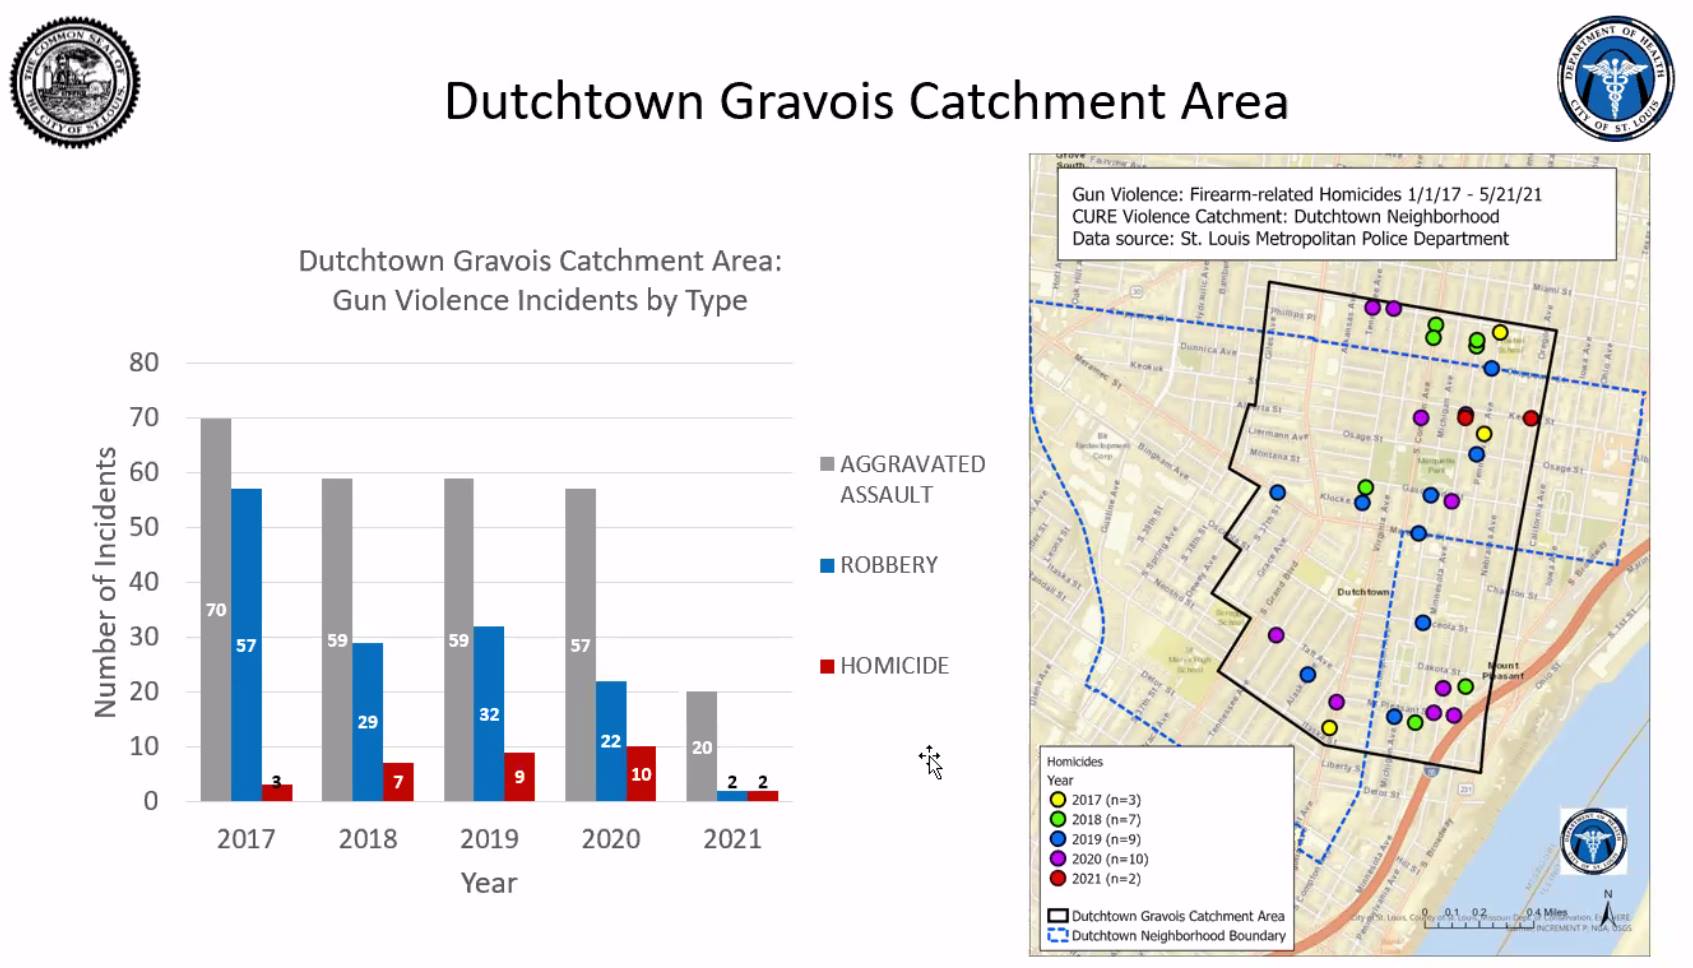 Map of violent crime in Dutchtown year over year showing sharp decreases since implementing the Cure Violence program.